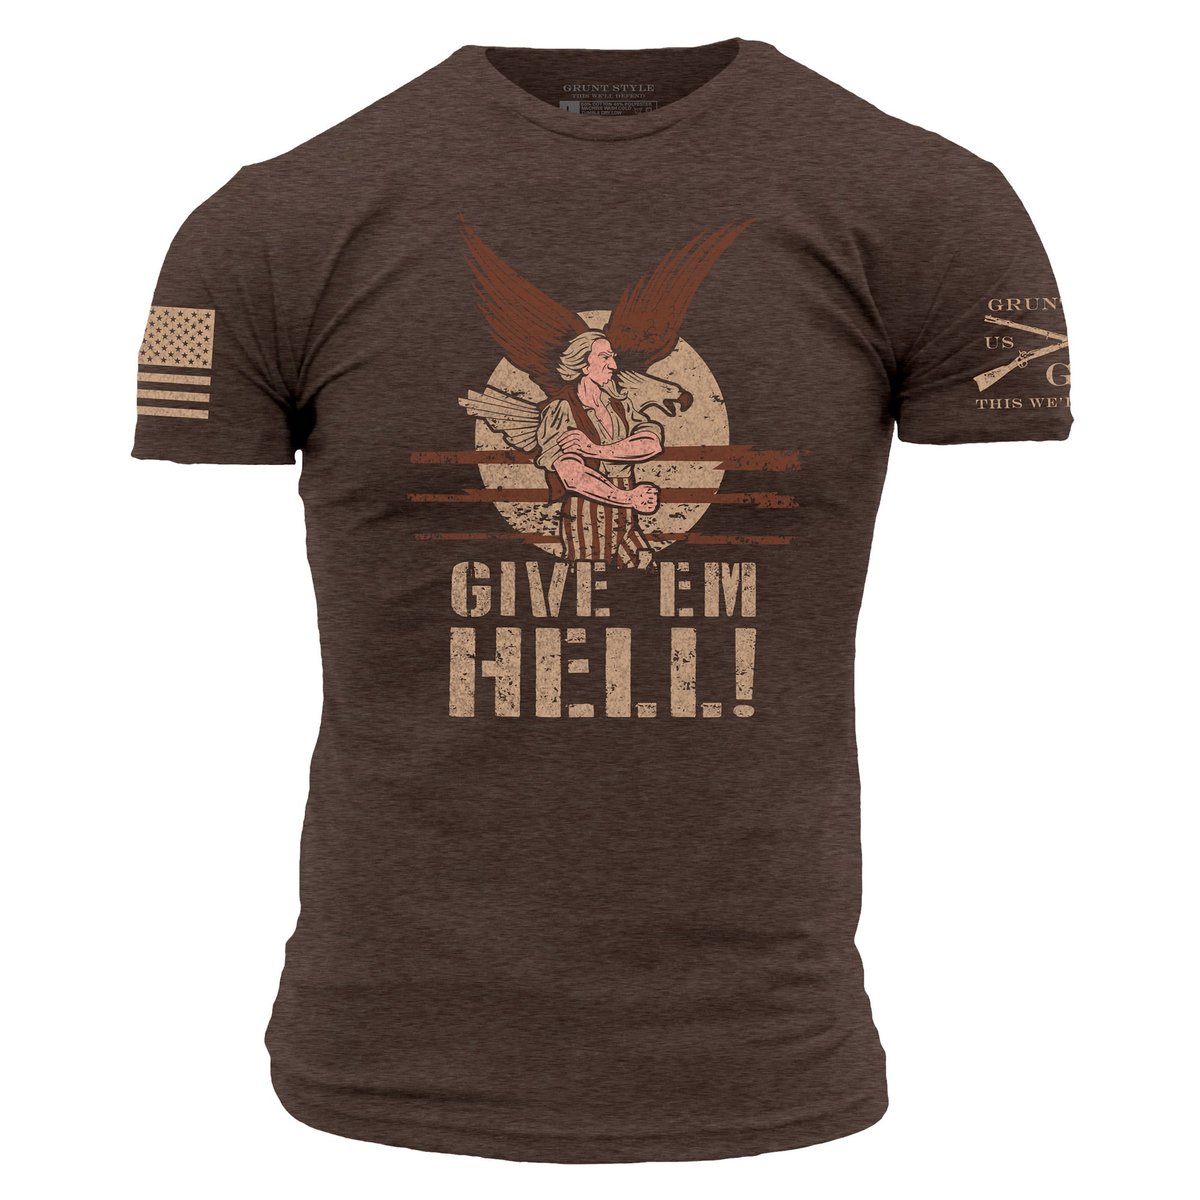 Men's Give Em Hell Tee in Brown with Frogskin Camo